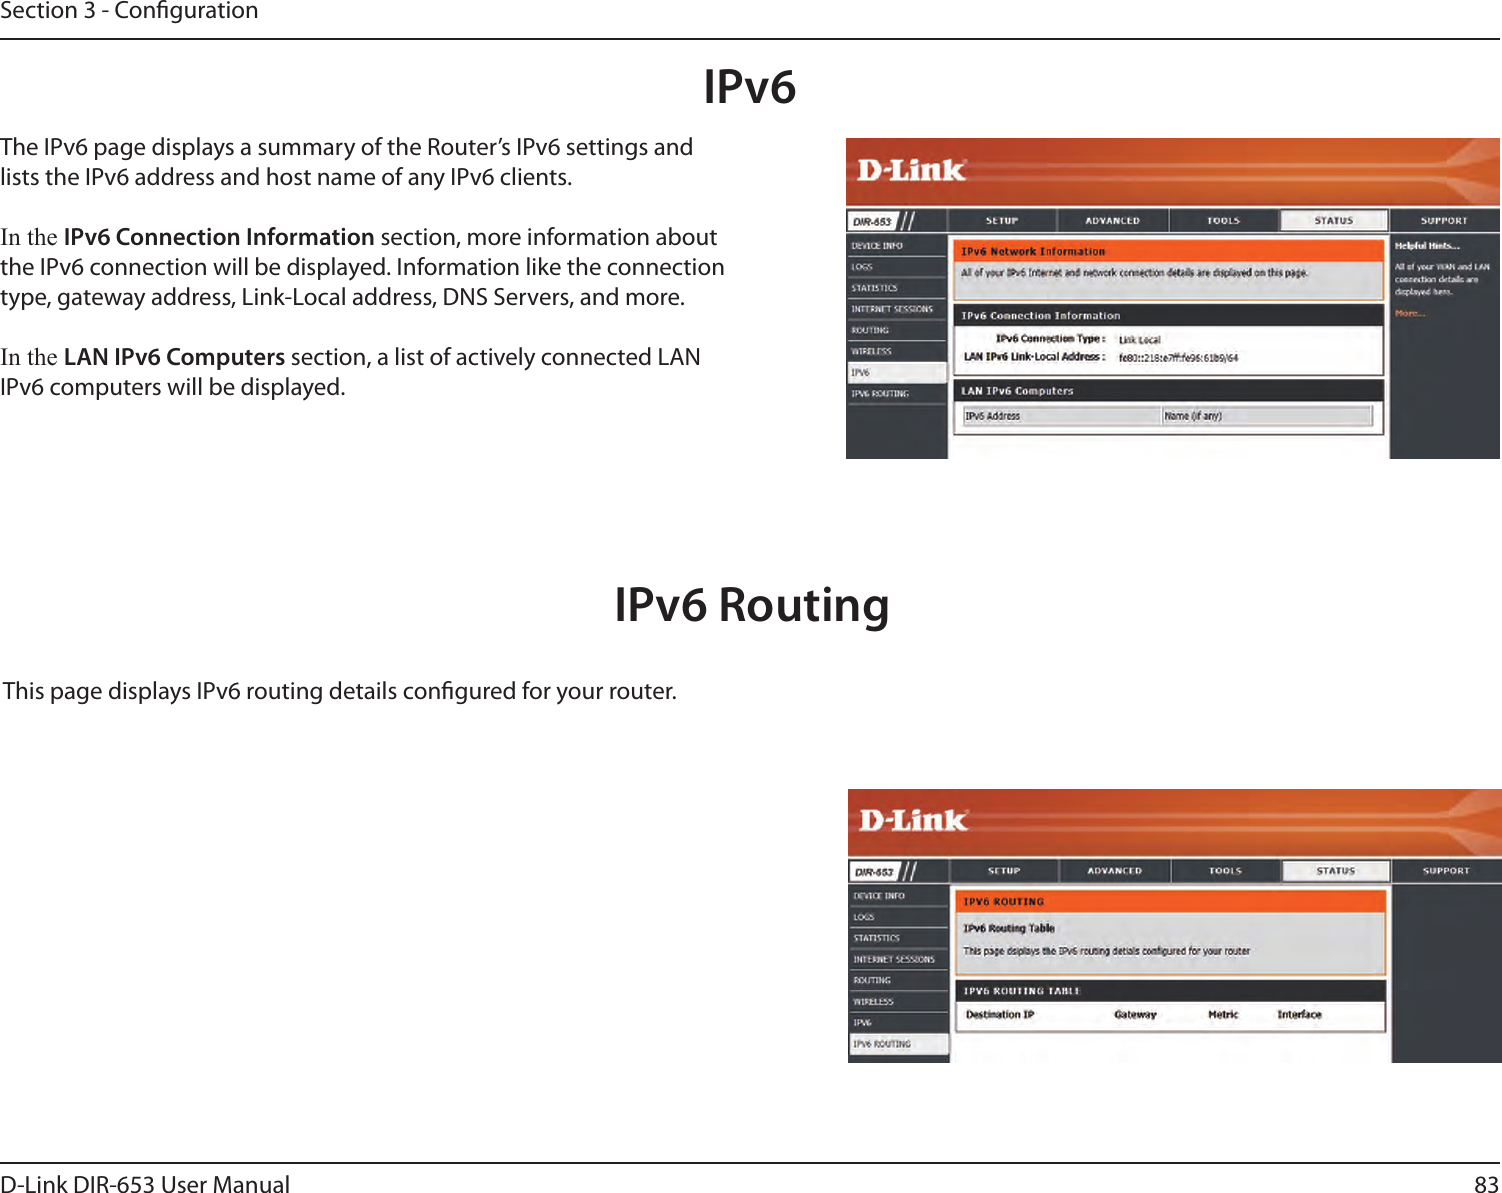 83D-Link DIR-653 User ManualSection 3 - CongurationIPv6The IPv6 page displays a summary of the Router’s IPv6 settings and lists the IPv6 address and host name of any IPv6 clients.In the IPv6 Connection Information section, more information about the IPv6 connection will be displayed. Information like the connection type, gateway address, Link-Local address, DNS Servers, and more.In the LAN IPv6 Computers section, a list of actively connected LAN IPv6 computers will be displayed.IPv6 RoutingThis page displays IPv6 routing details congured for your router. 